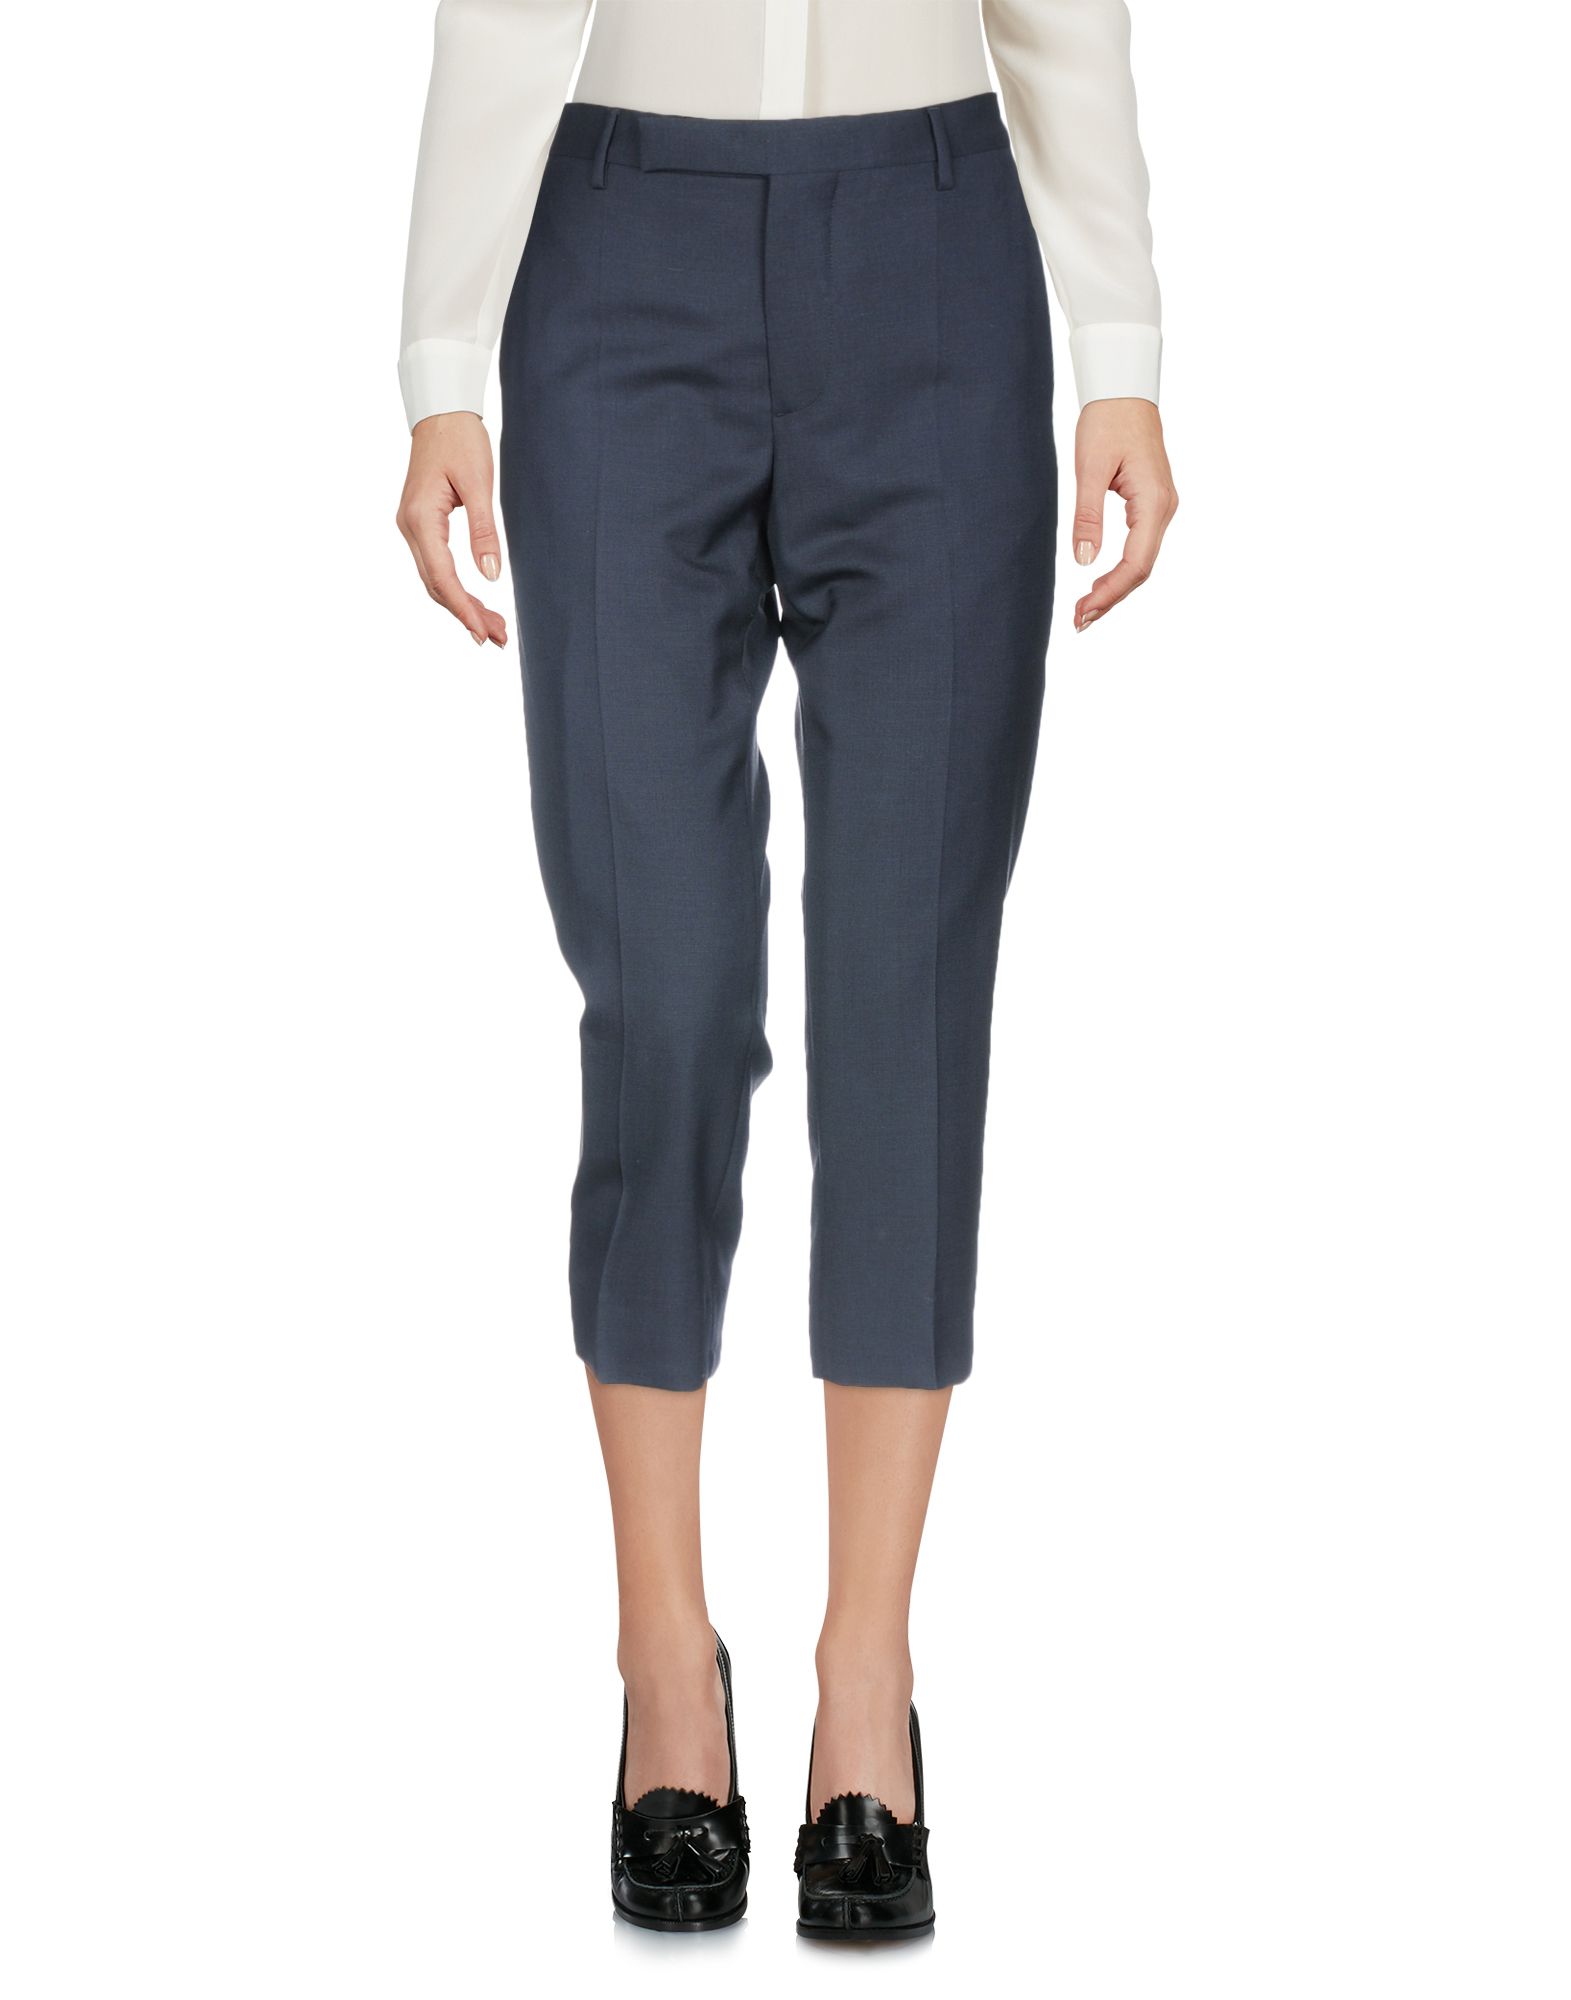 MAISON MARGIELA CROPPED trousers,13179978WH 3